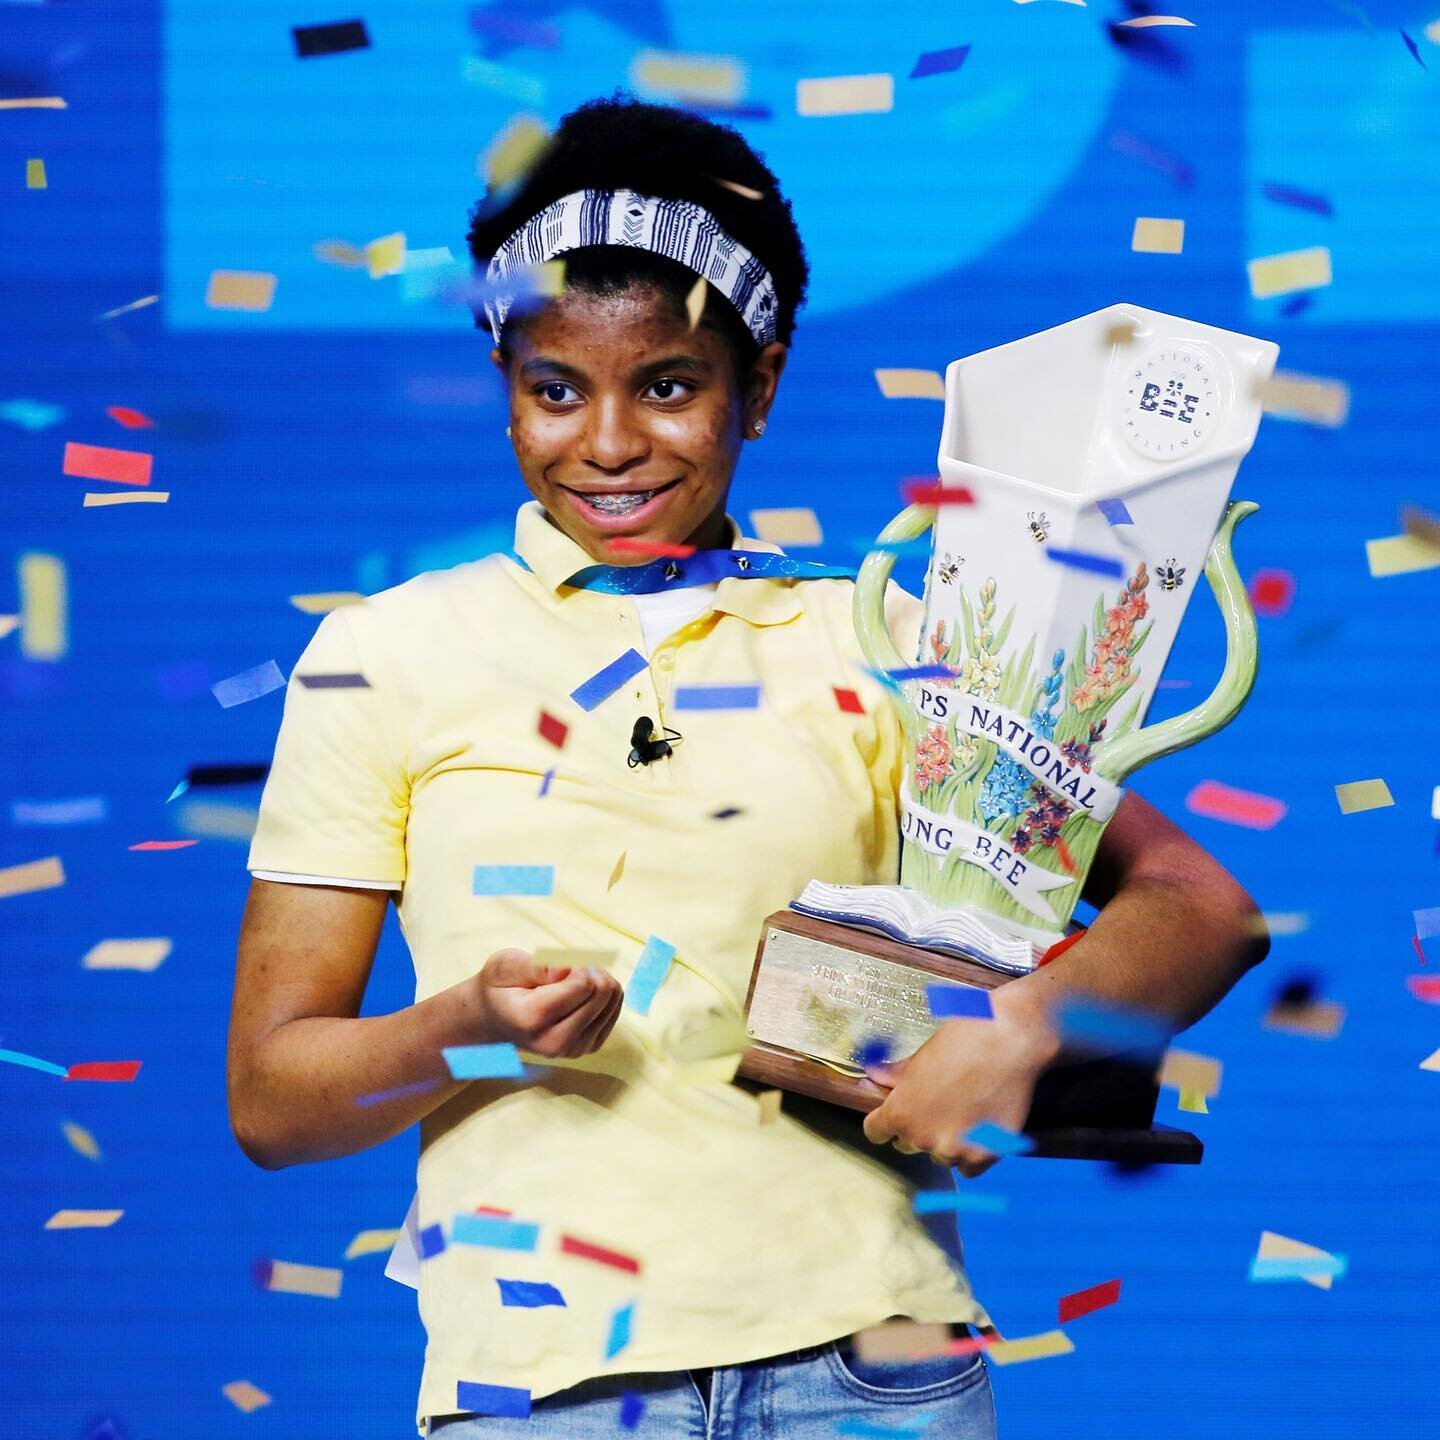 14 year-old Zaila Avant-garde of New Orleans has become the first African American contestant to win the 2021 Scripps National Spelling Bee competition! 

Proud of you, young queen 👸🏾